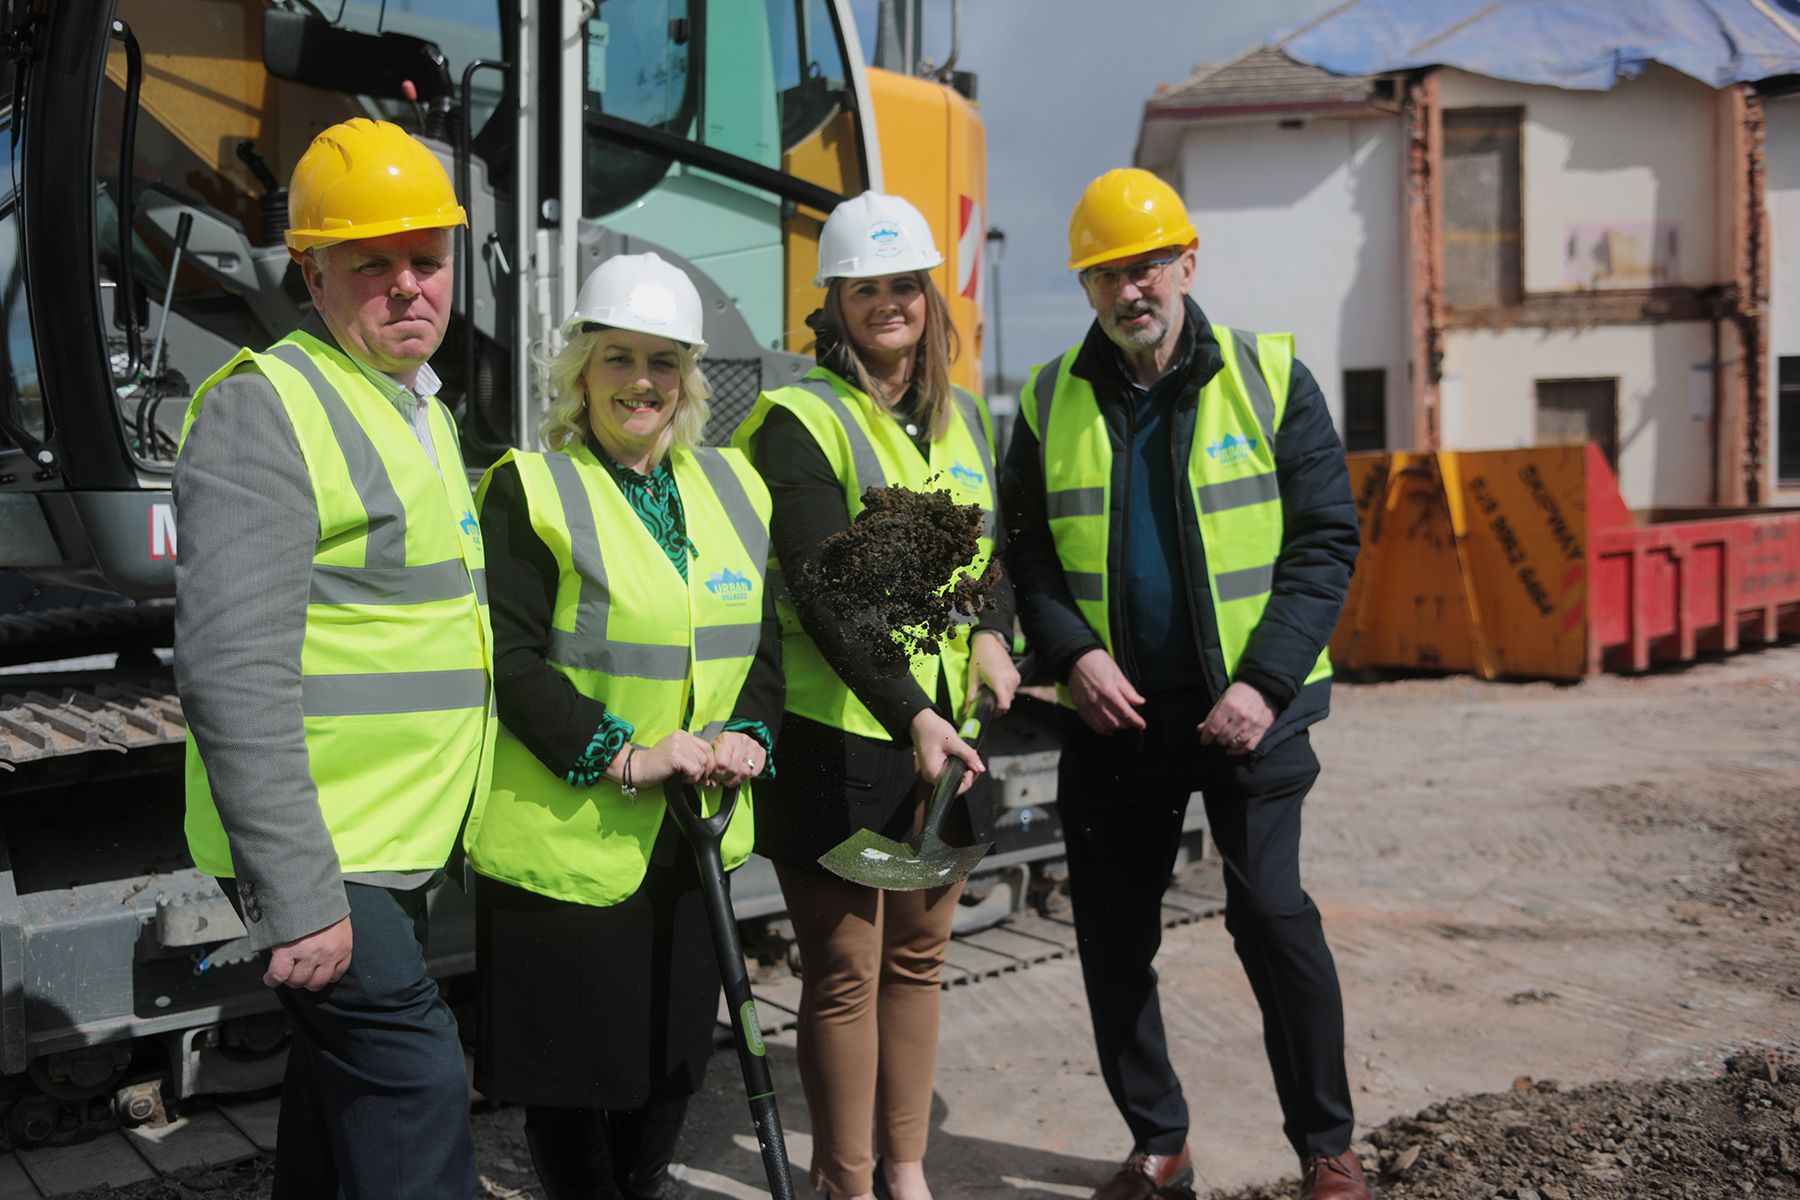 LOCKHOUSE PROJECT: Gerard Rice (Director of Services, LORAG) Junior Minister Pam Cameron, Junior Minister Aisling Reilly and John Gormley (Chairperson, LORAG)